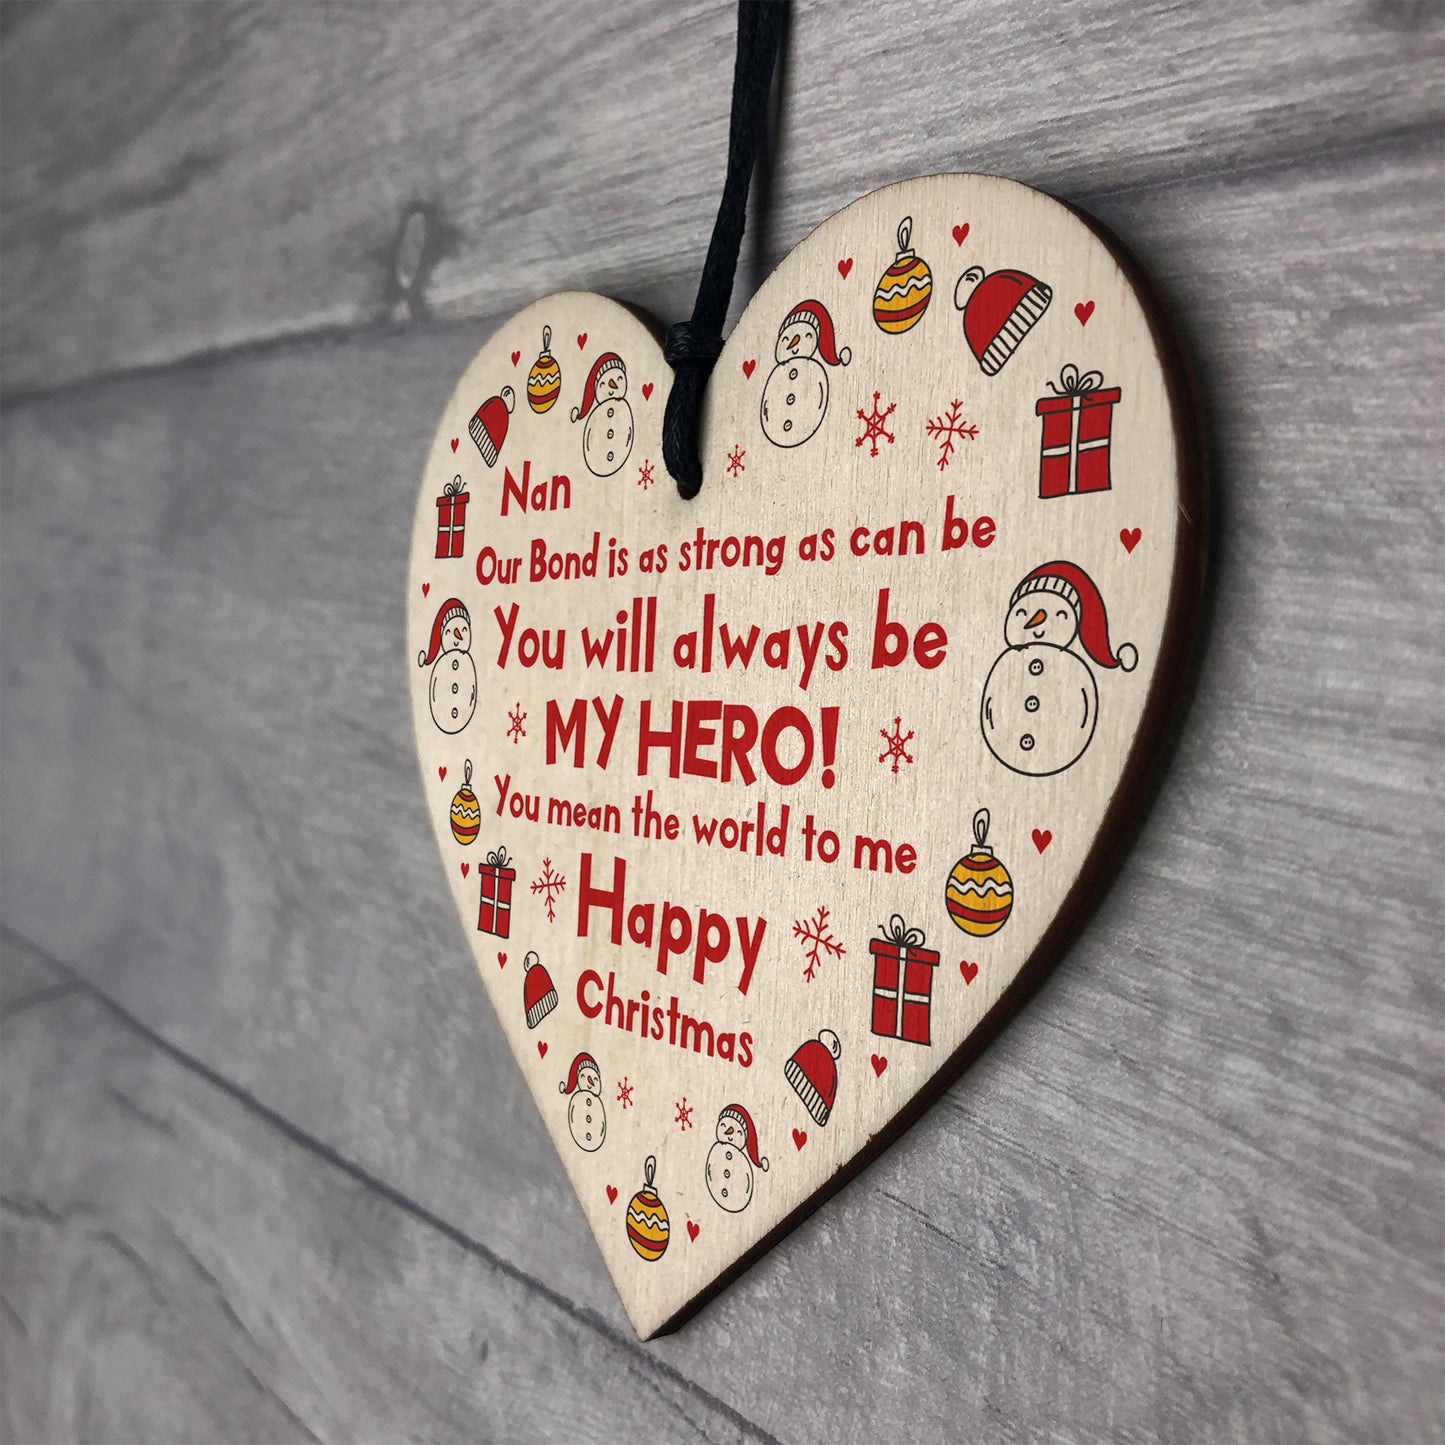 Nan Nanny Christmas Tree Decoration Gifts For Her Grandparents